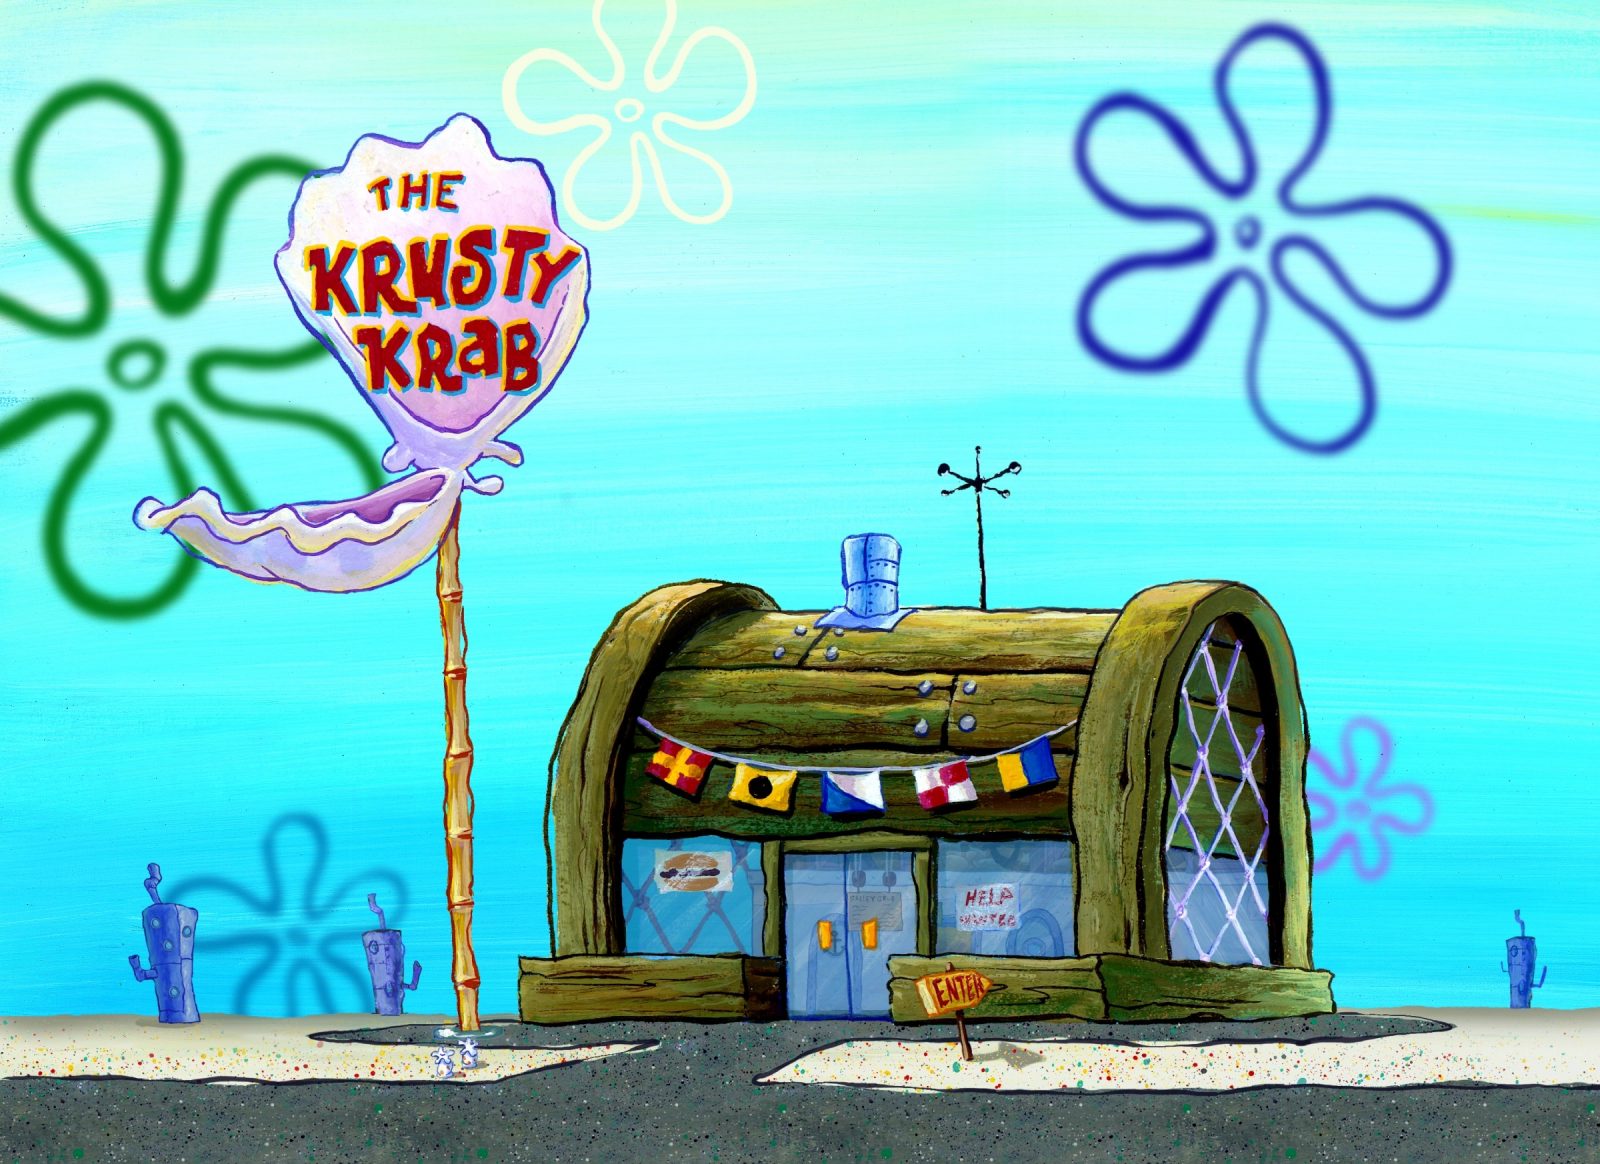 If You Can Pass This General Knowledge Test on Your First Try, You’re Undoubtedly Way Too Smart Krusty Krab